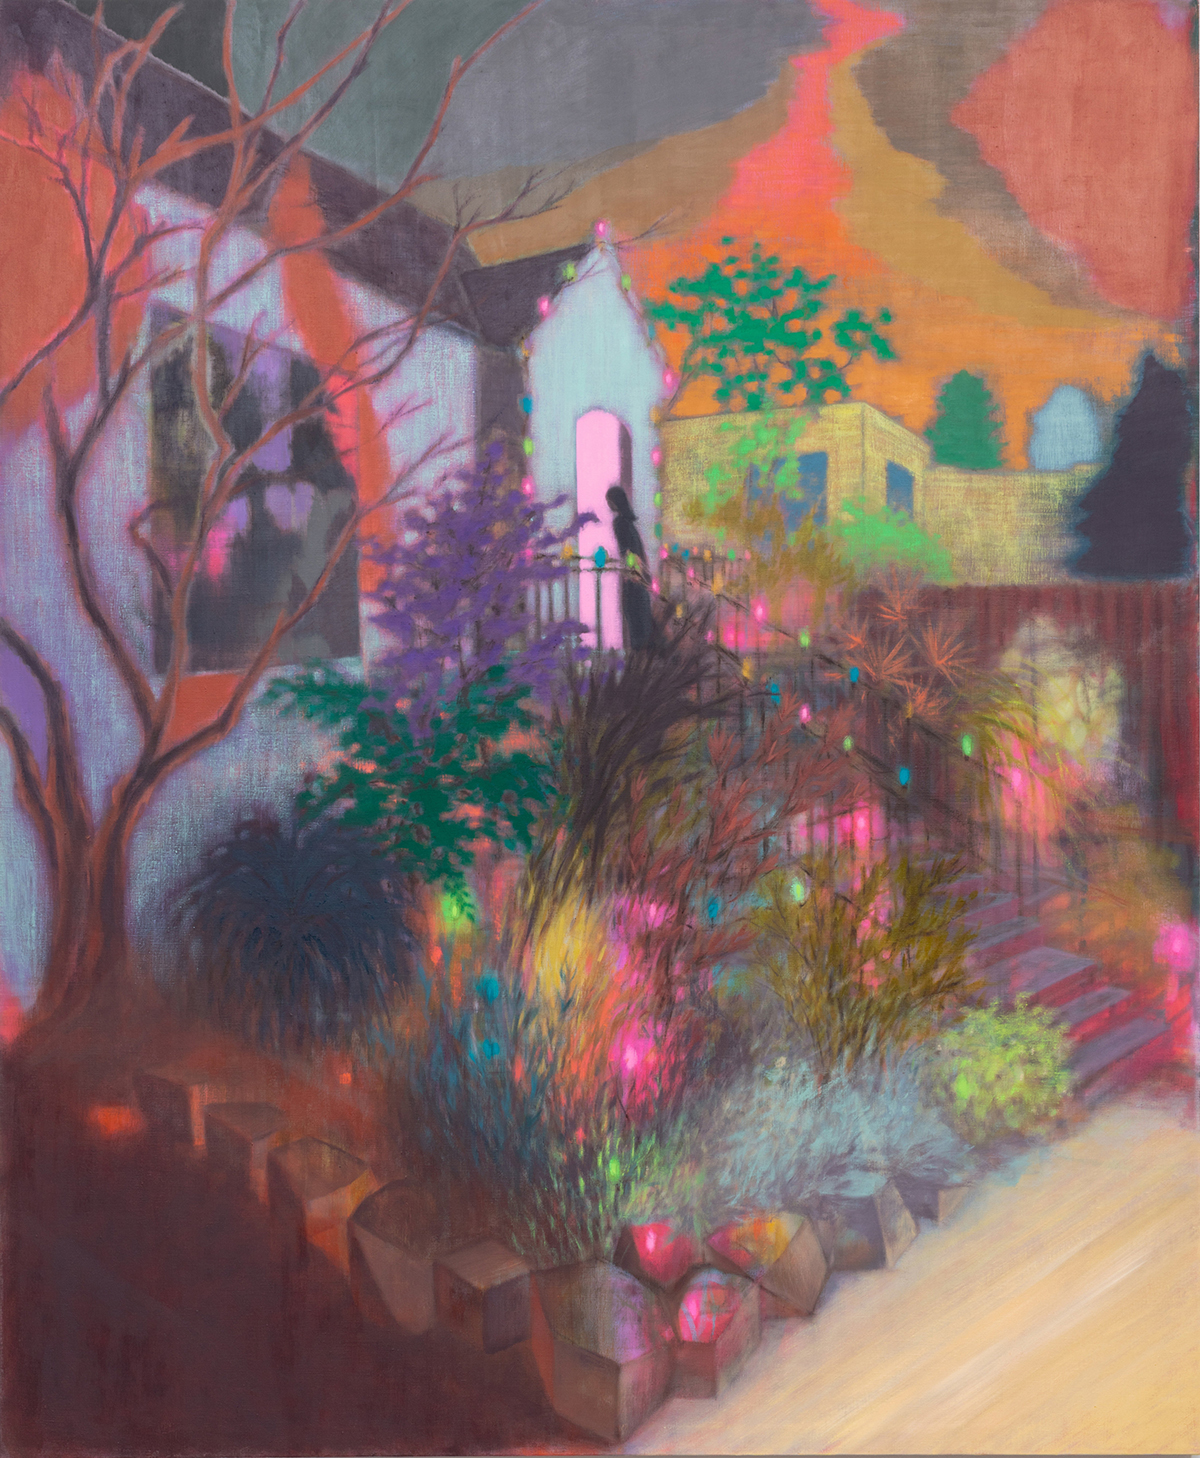 A colourful painting of a woman walking into a house